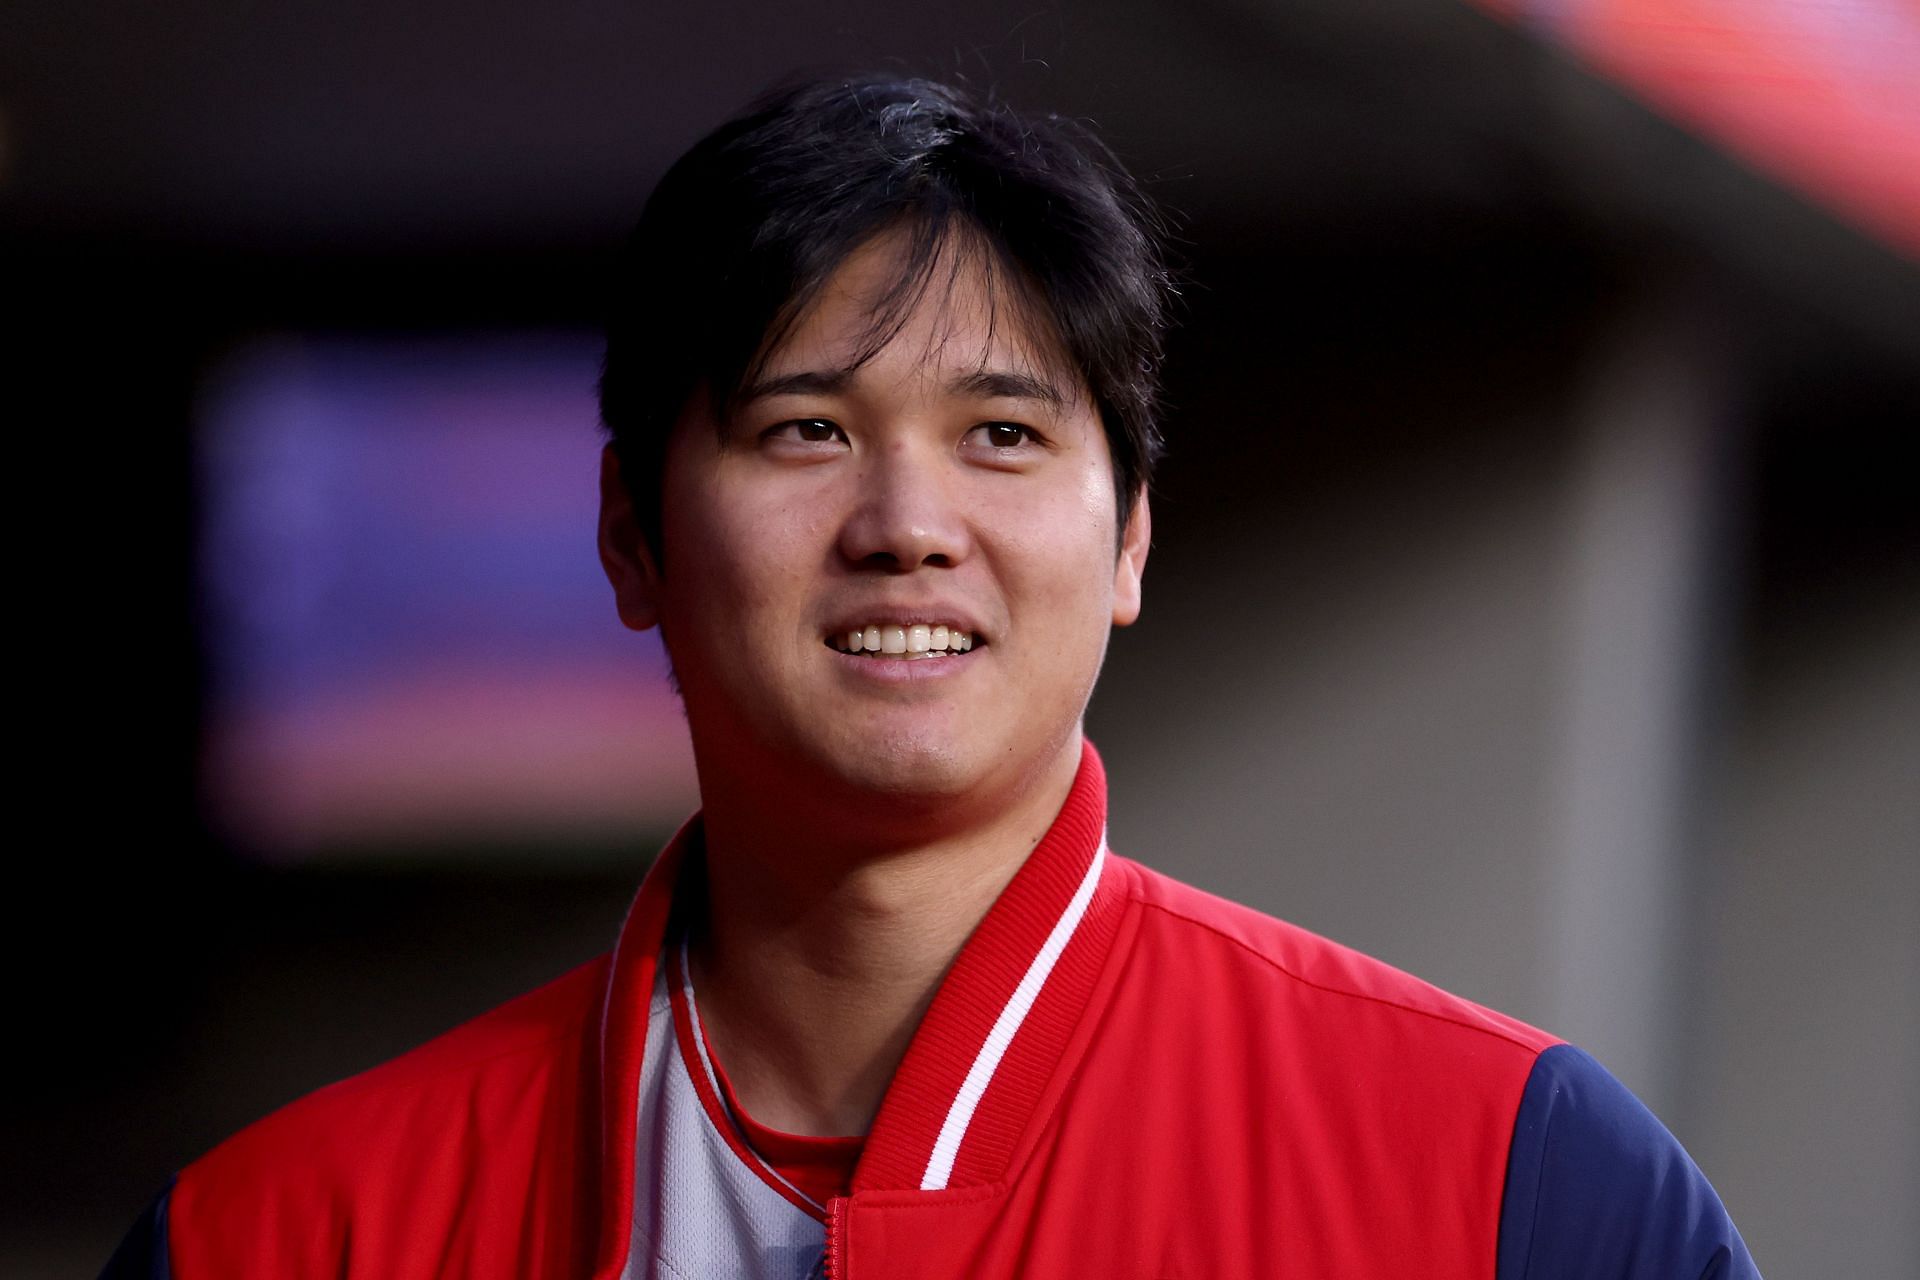 MLB fans react to Shohei Ohtani's mannerisms while a foul ball flew ...